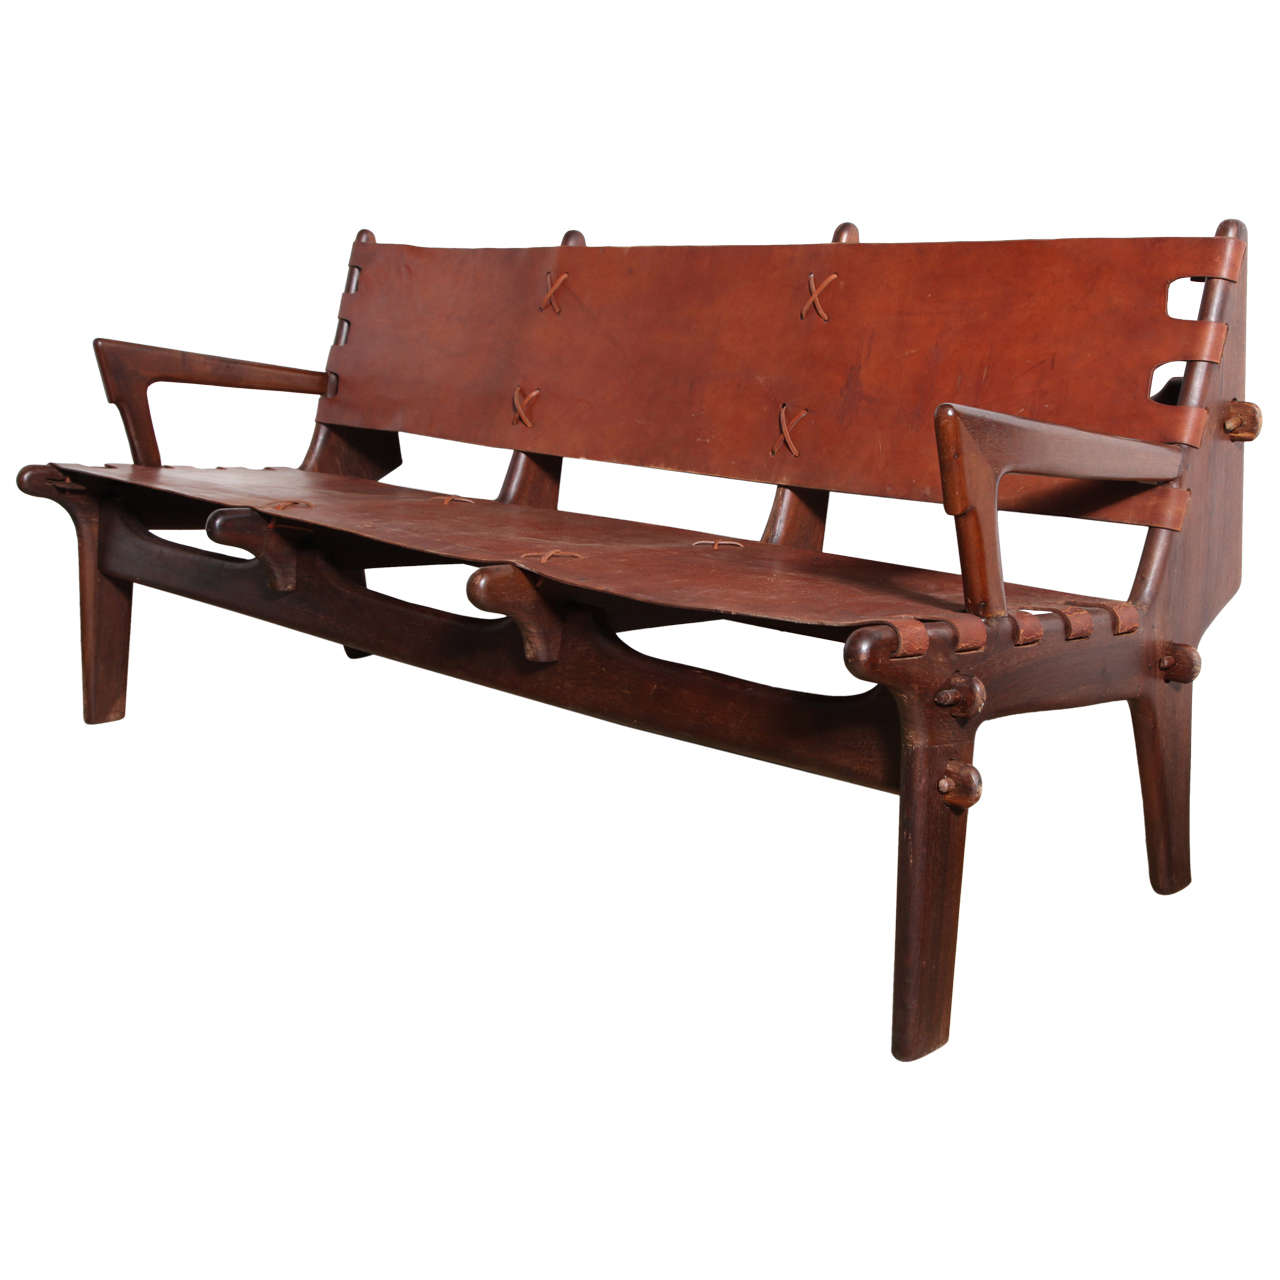 Angel Pazmino Rosewood & Leather Three-Seat Sofa, Equador, 1960's For Sale